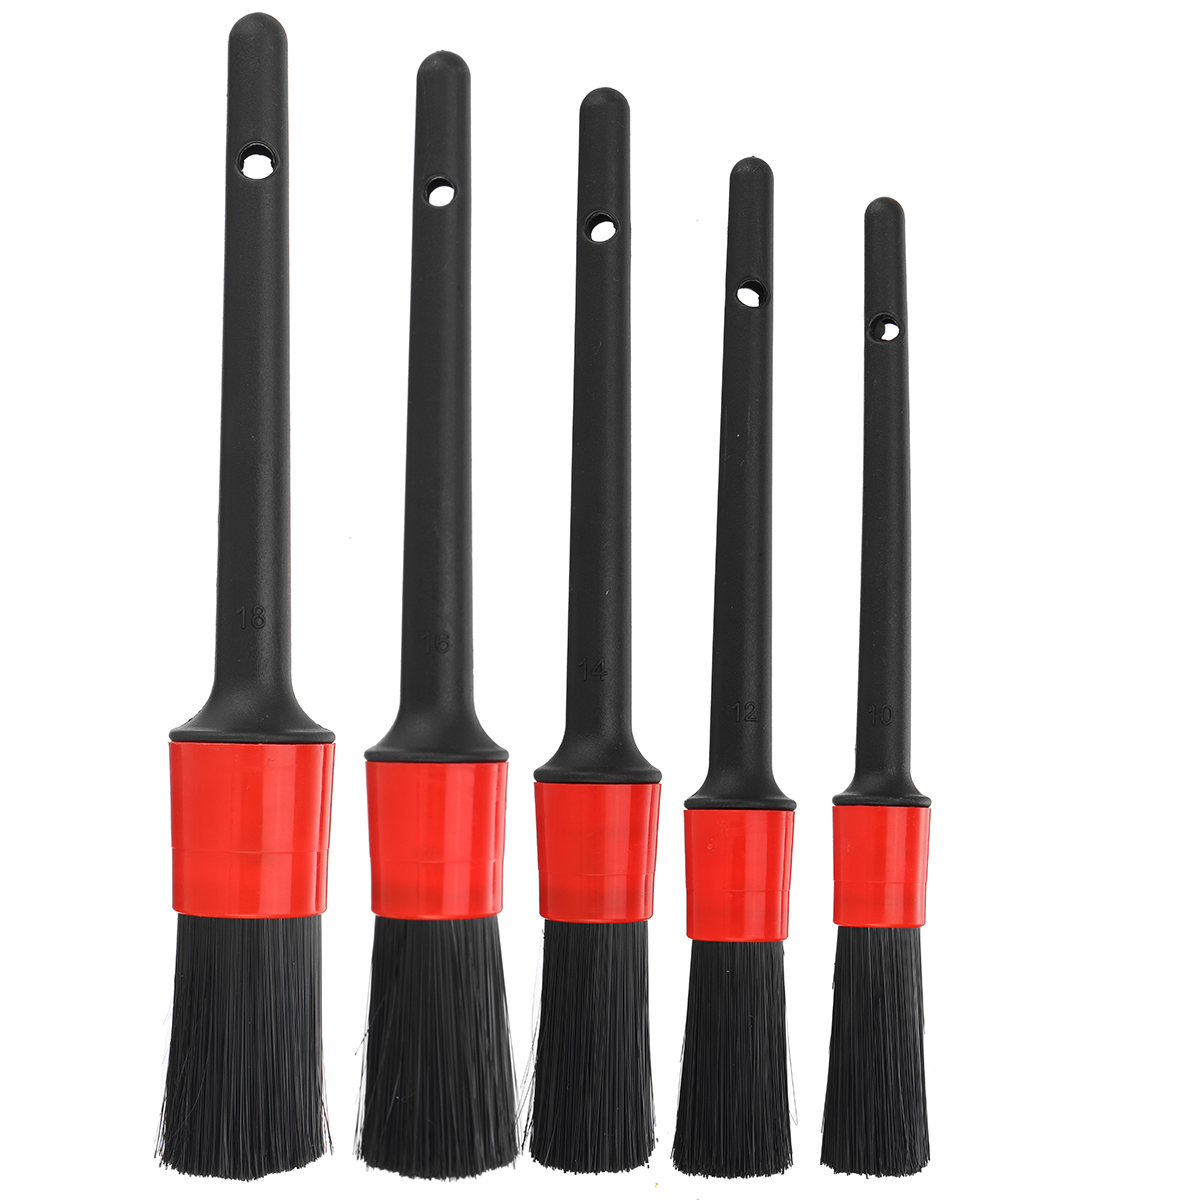 17PCS Cleaning Detailing Brush Set Dirt Dust Clean Brush Interior Exterior Leather Air Vents Care Clean Tools for Car Motorcycle Air Vents - Auto GoShop